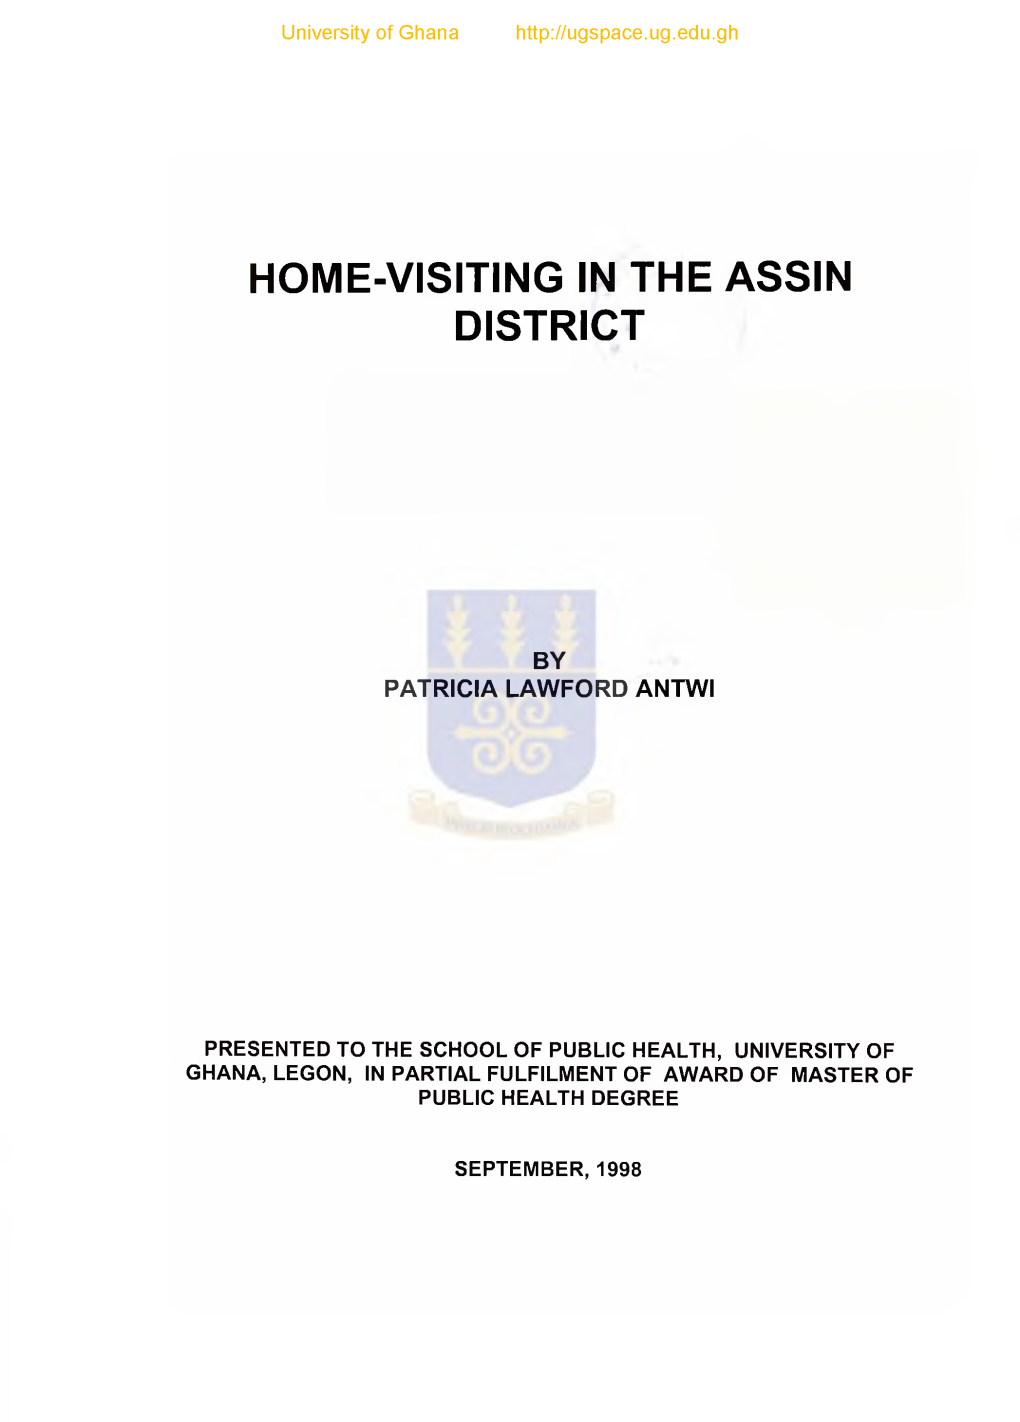 Home-Visiting in the Assin District